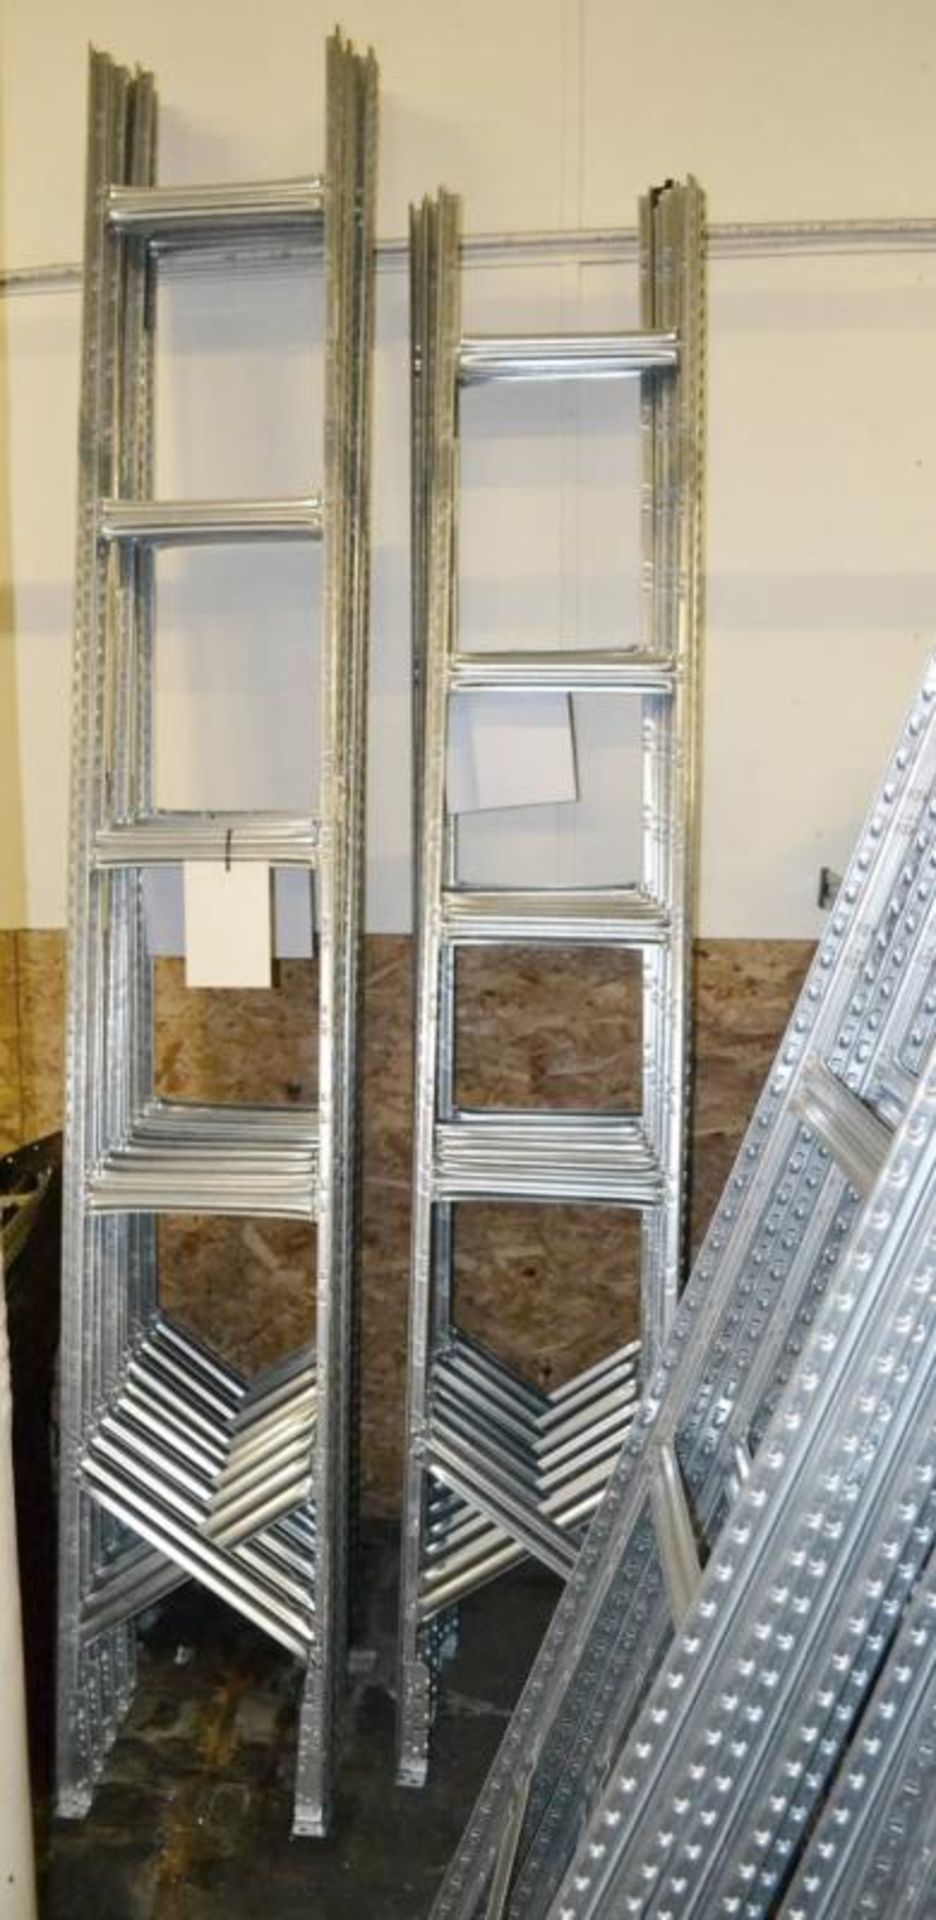 9 x Bays of Metalsistem Steel Modular Storage Shelving - Includes 29 Pieces - Recently Removed - Image 5 of 16